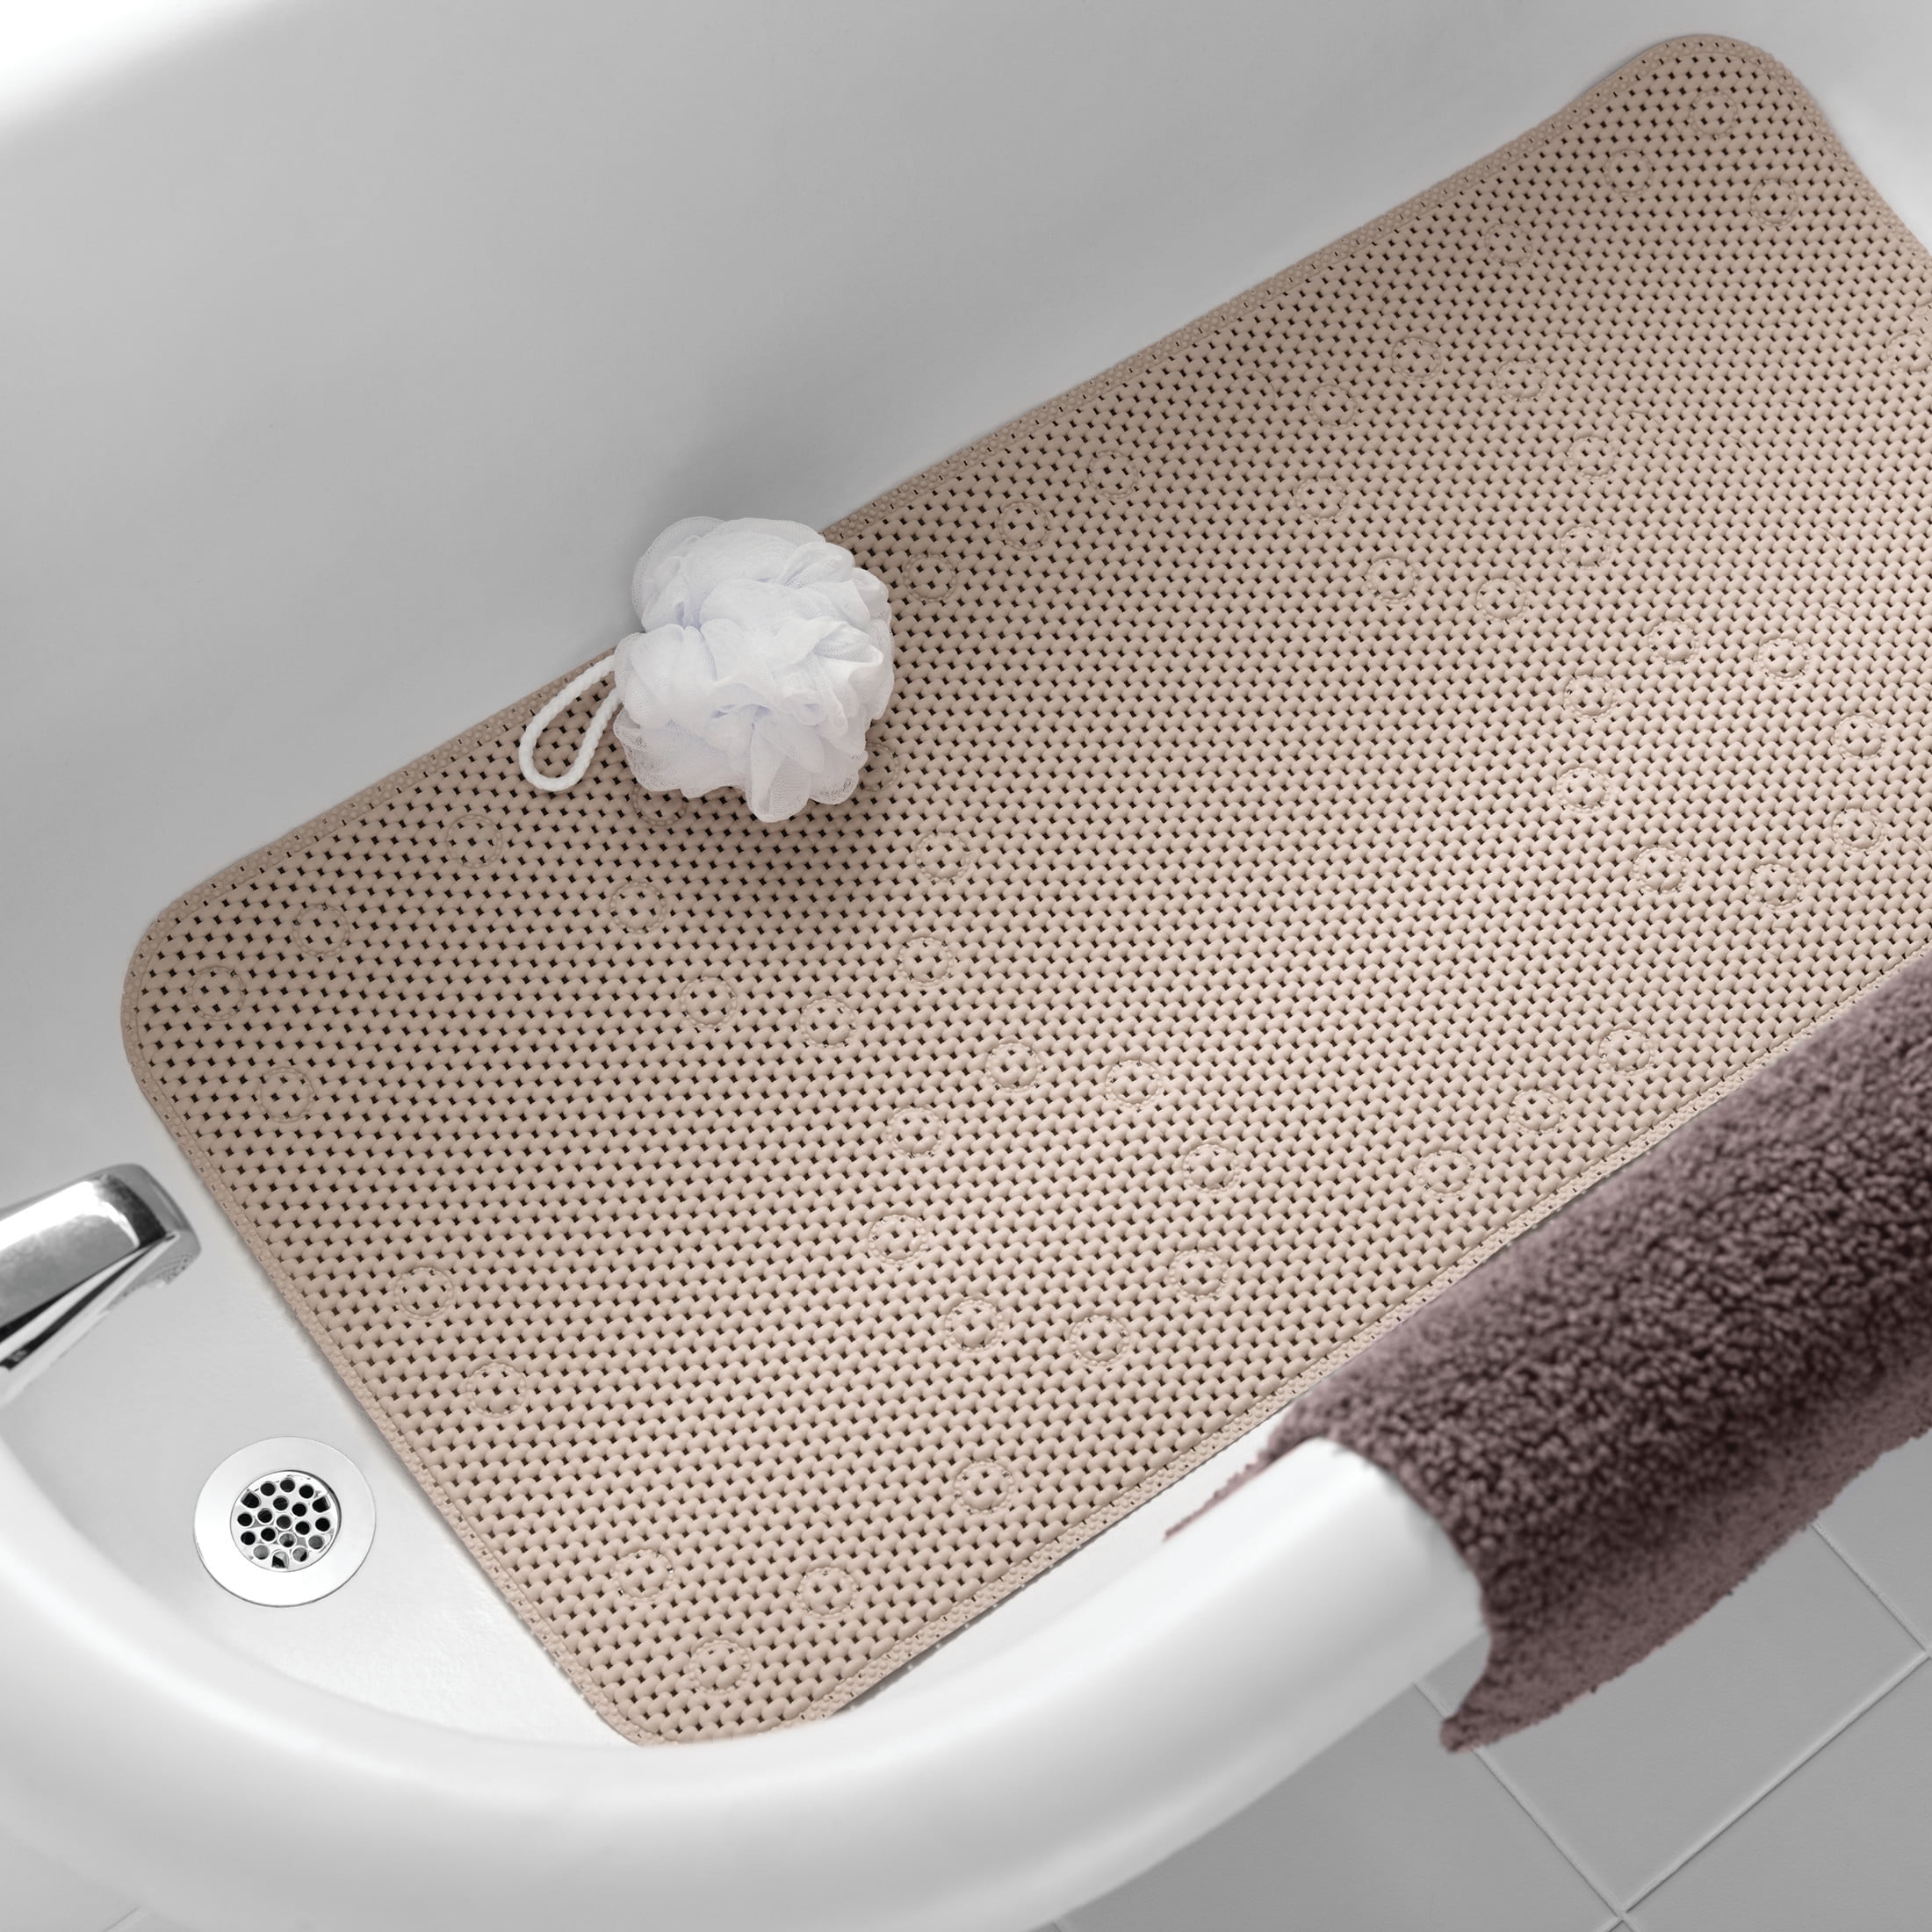  Clorox by Duck Brand Cushioned Foam Bathtub Mat, Non Slip Bath  Mat with Suction Cups For Comfort and Safety, 17 x 36, Taupe : Home &  Kitchen